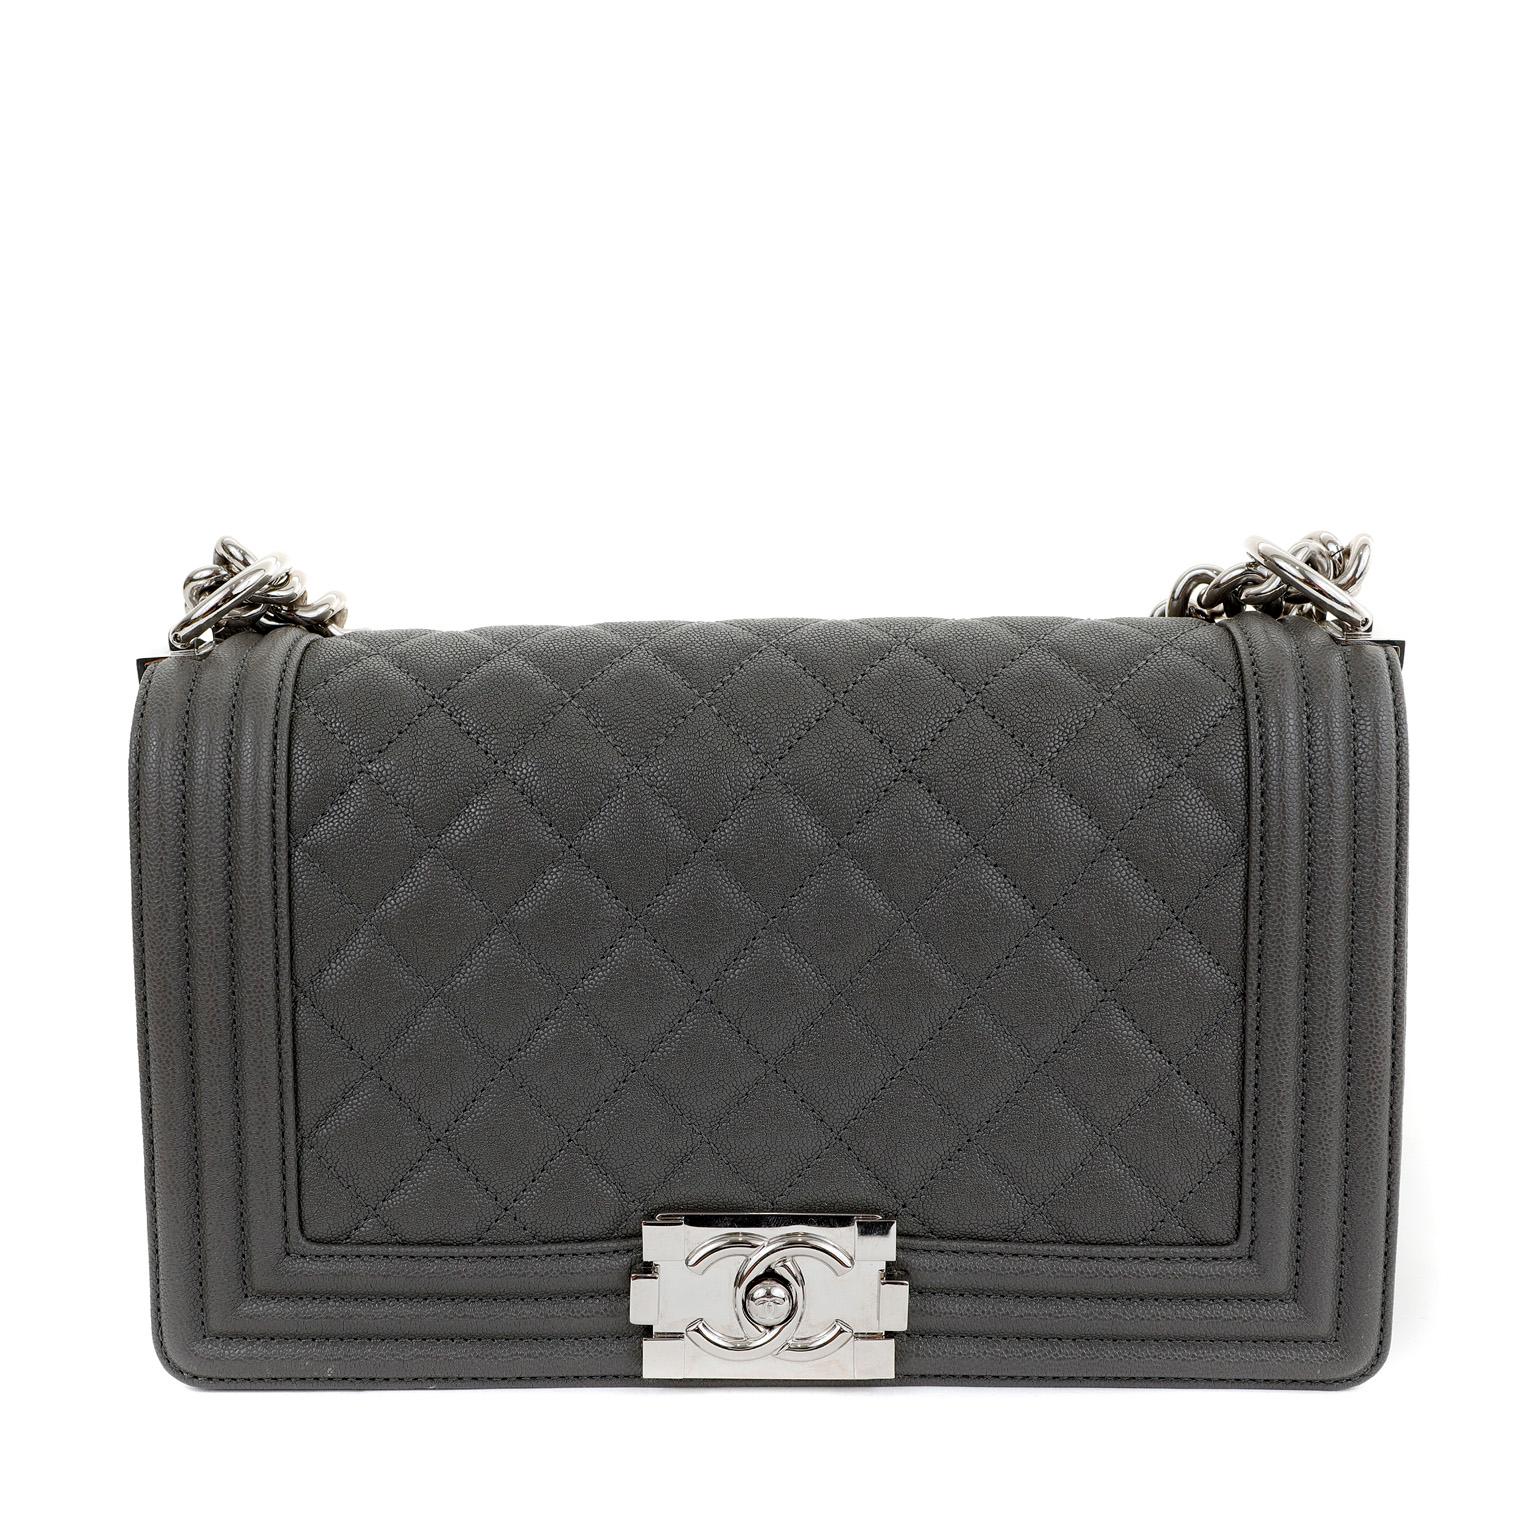 This authentic Chanel Graphite Caviar Medium Boy Bag is in pristine condition. The updated design is structured and edgy with a versatility that makes it extremely popular.  Neutral graphite grey caviar leather is textured and durable. Further